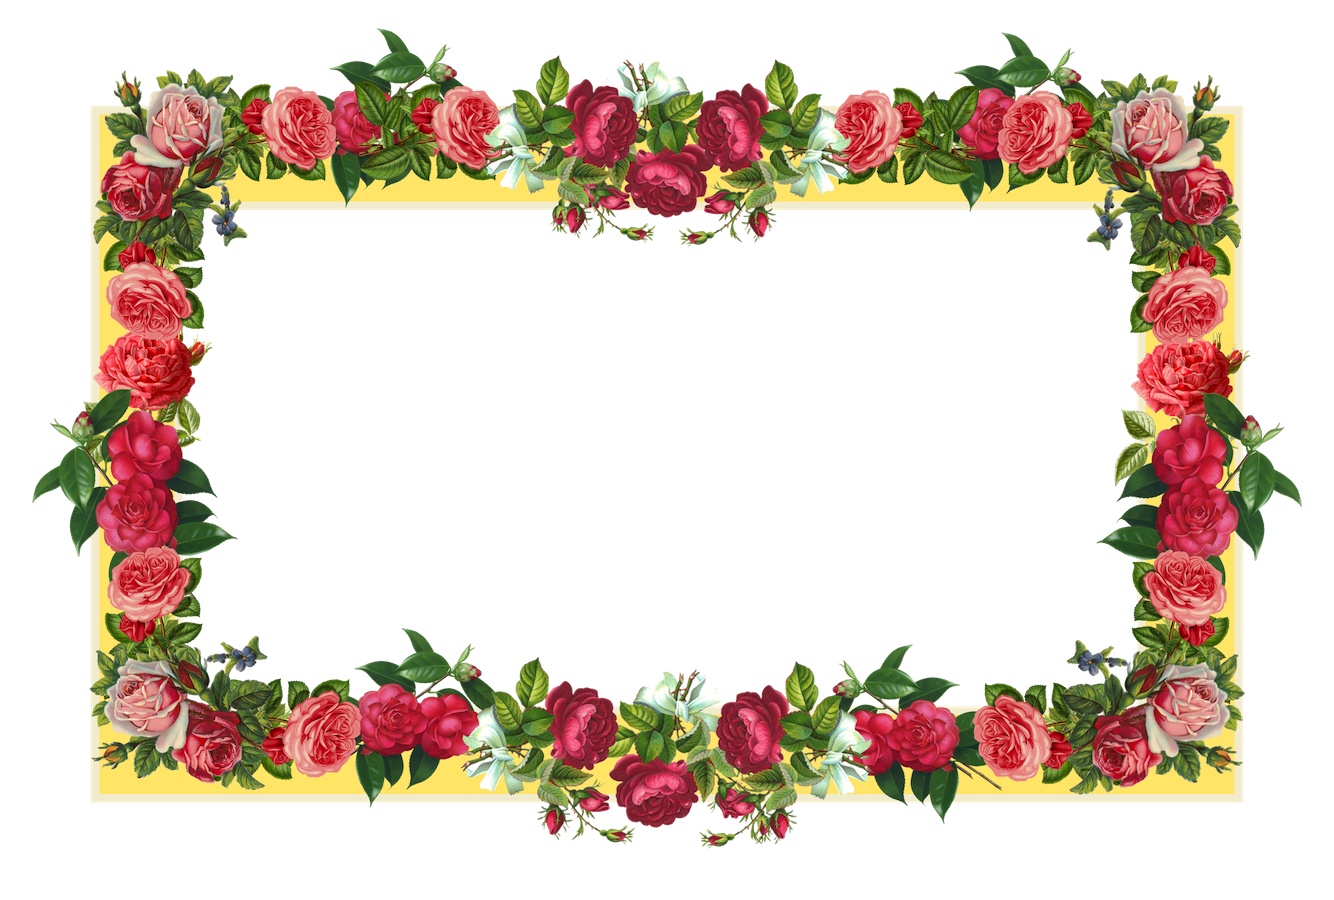 Red Wedding Border Png - ClipArt Best